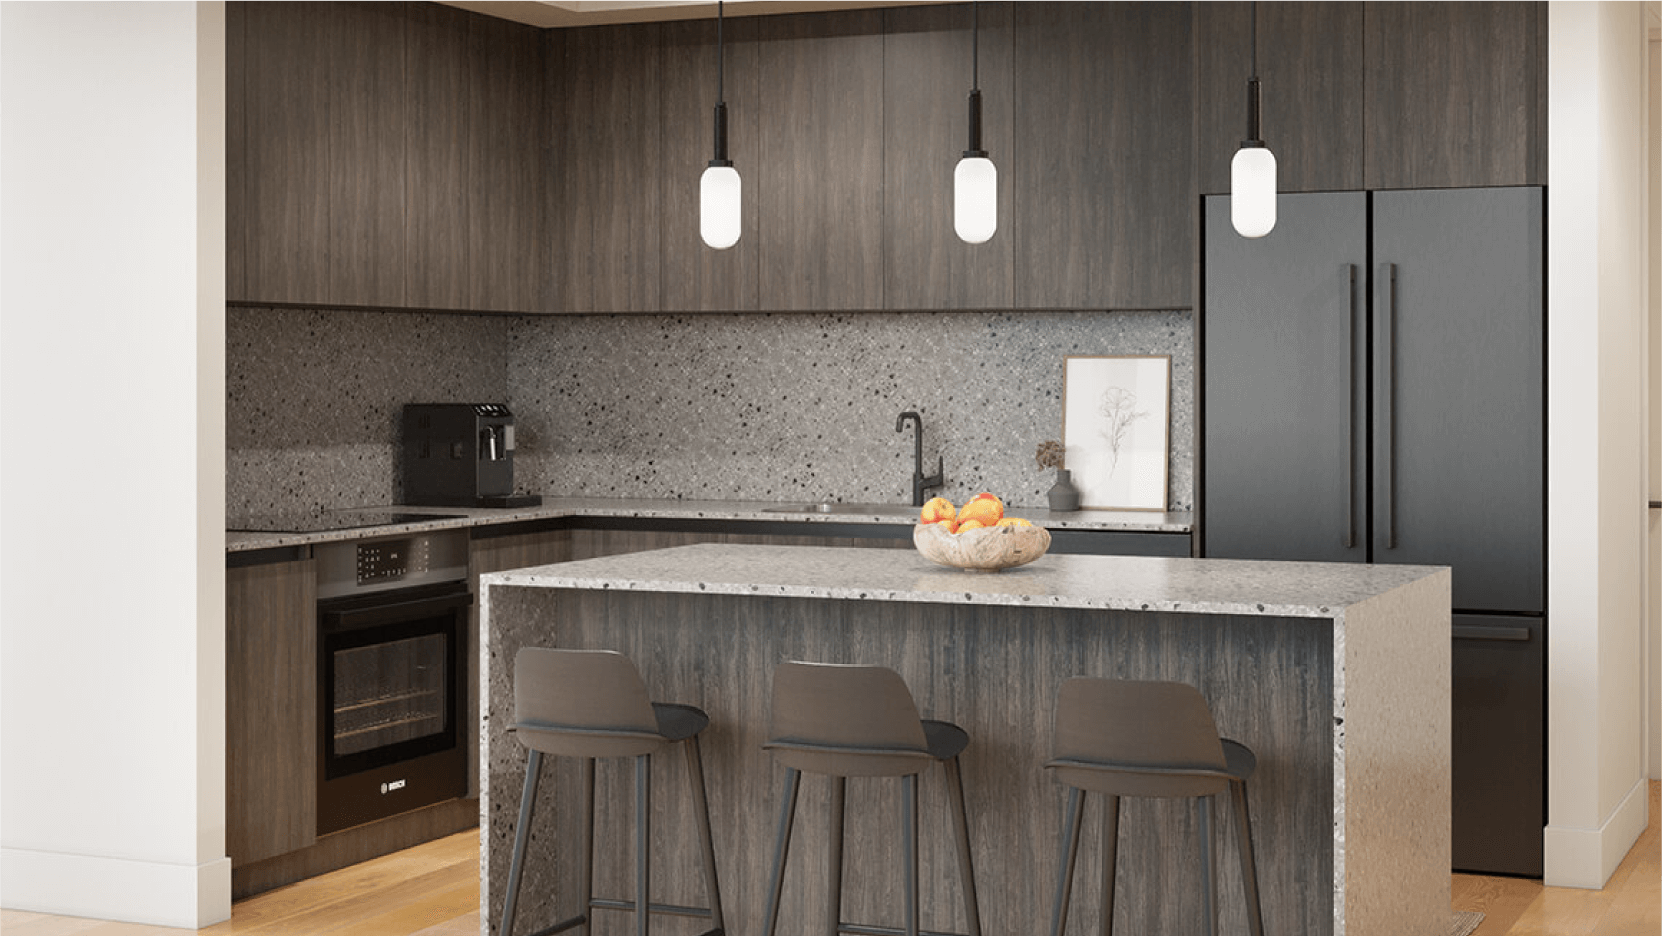 Vesper ATX has contemporary kitchens with terrazzo countertops, dark wood cabinetry, and state-of-the-art appliances, highlighted by elegant pendant lights and a minimalist aesthetic.